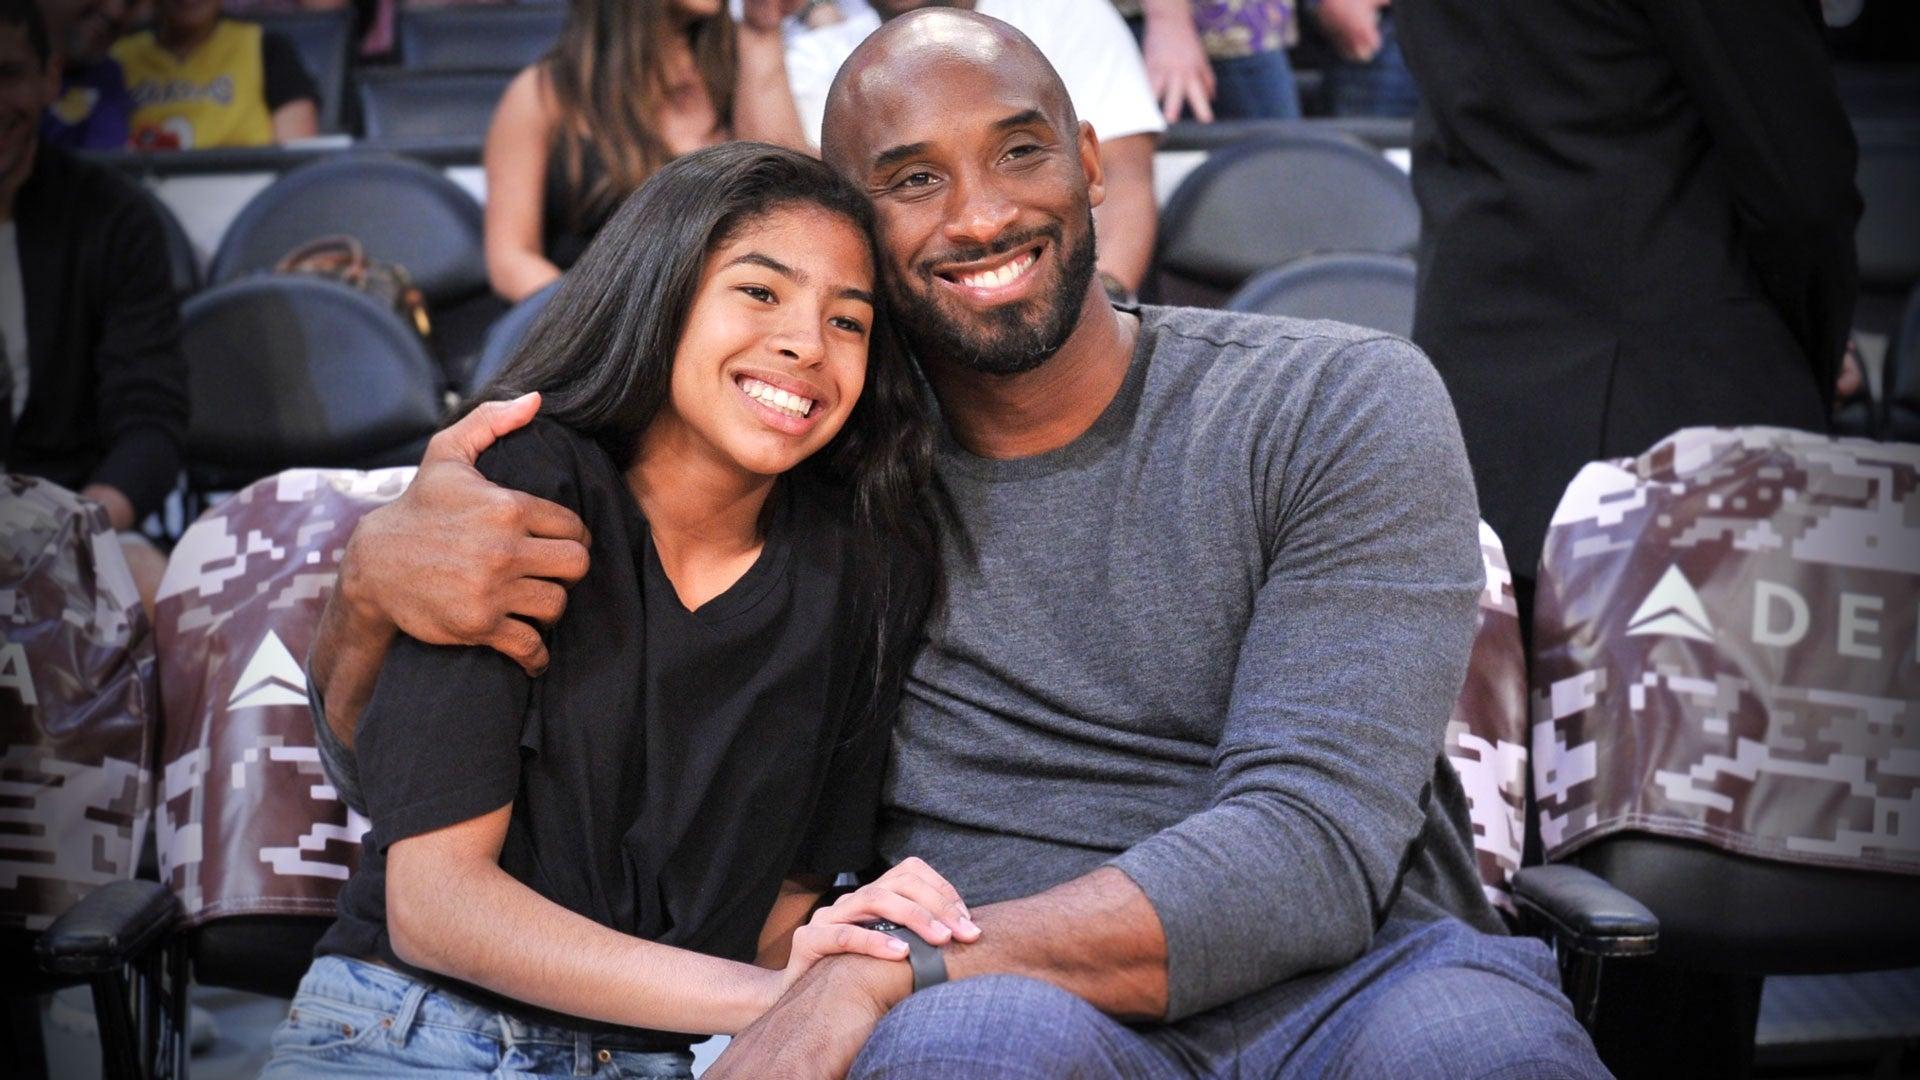 Inside Kobe Bryant's Special Bond With Daughter Gianna